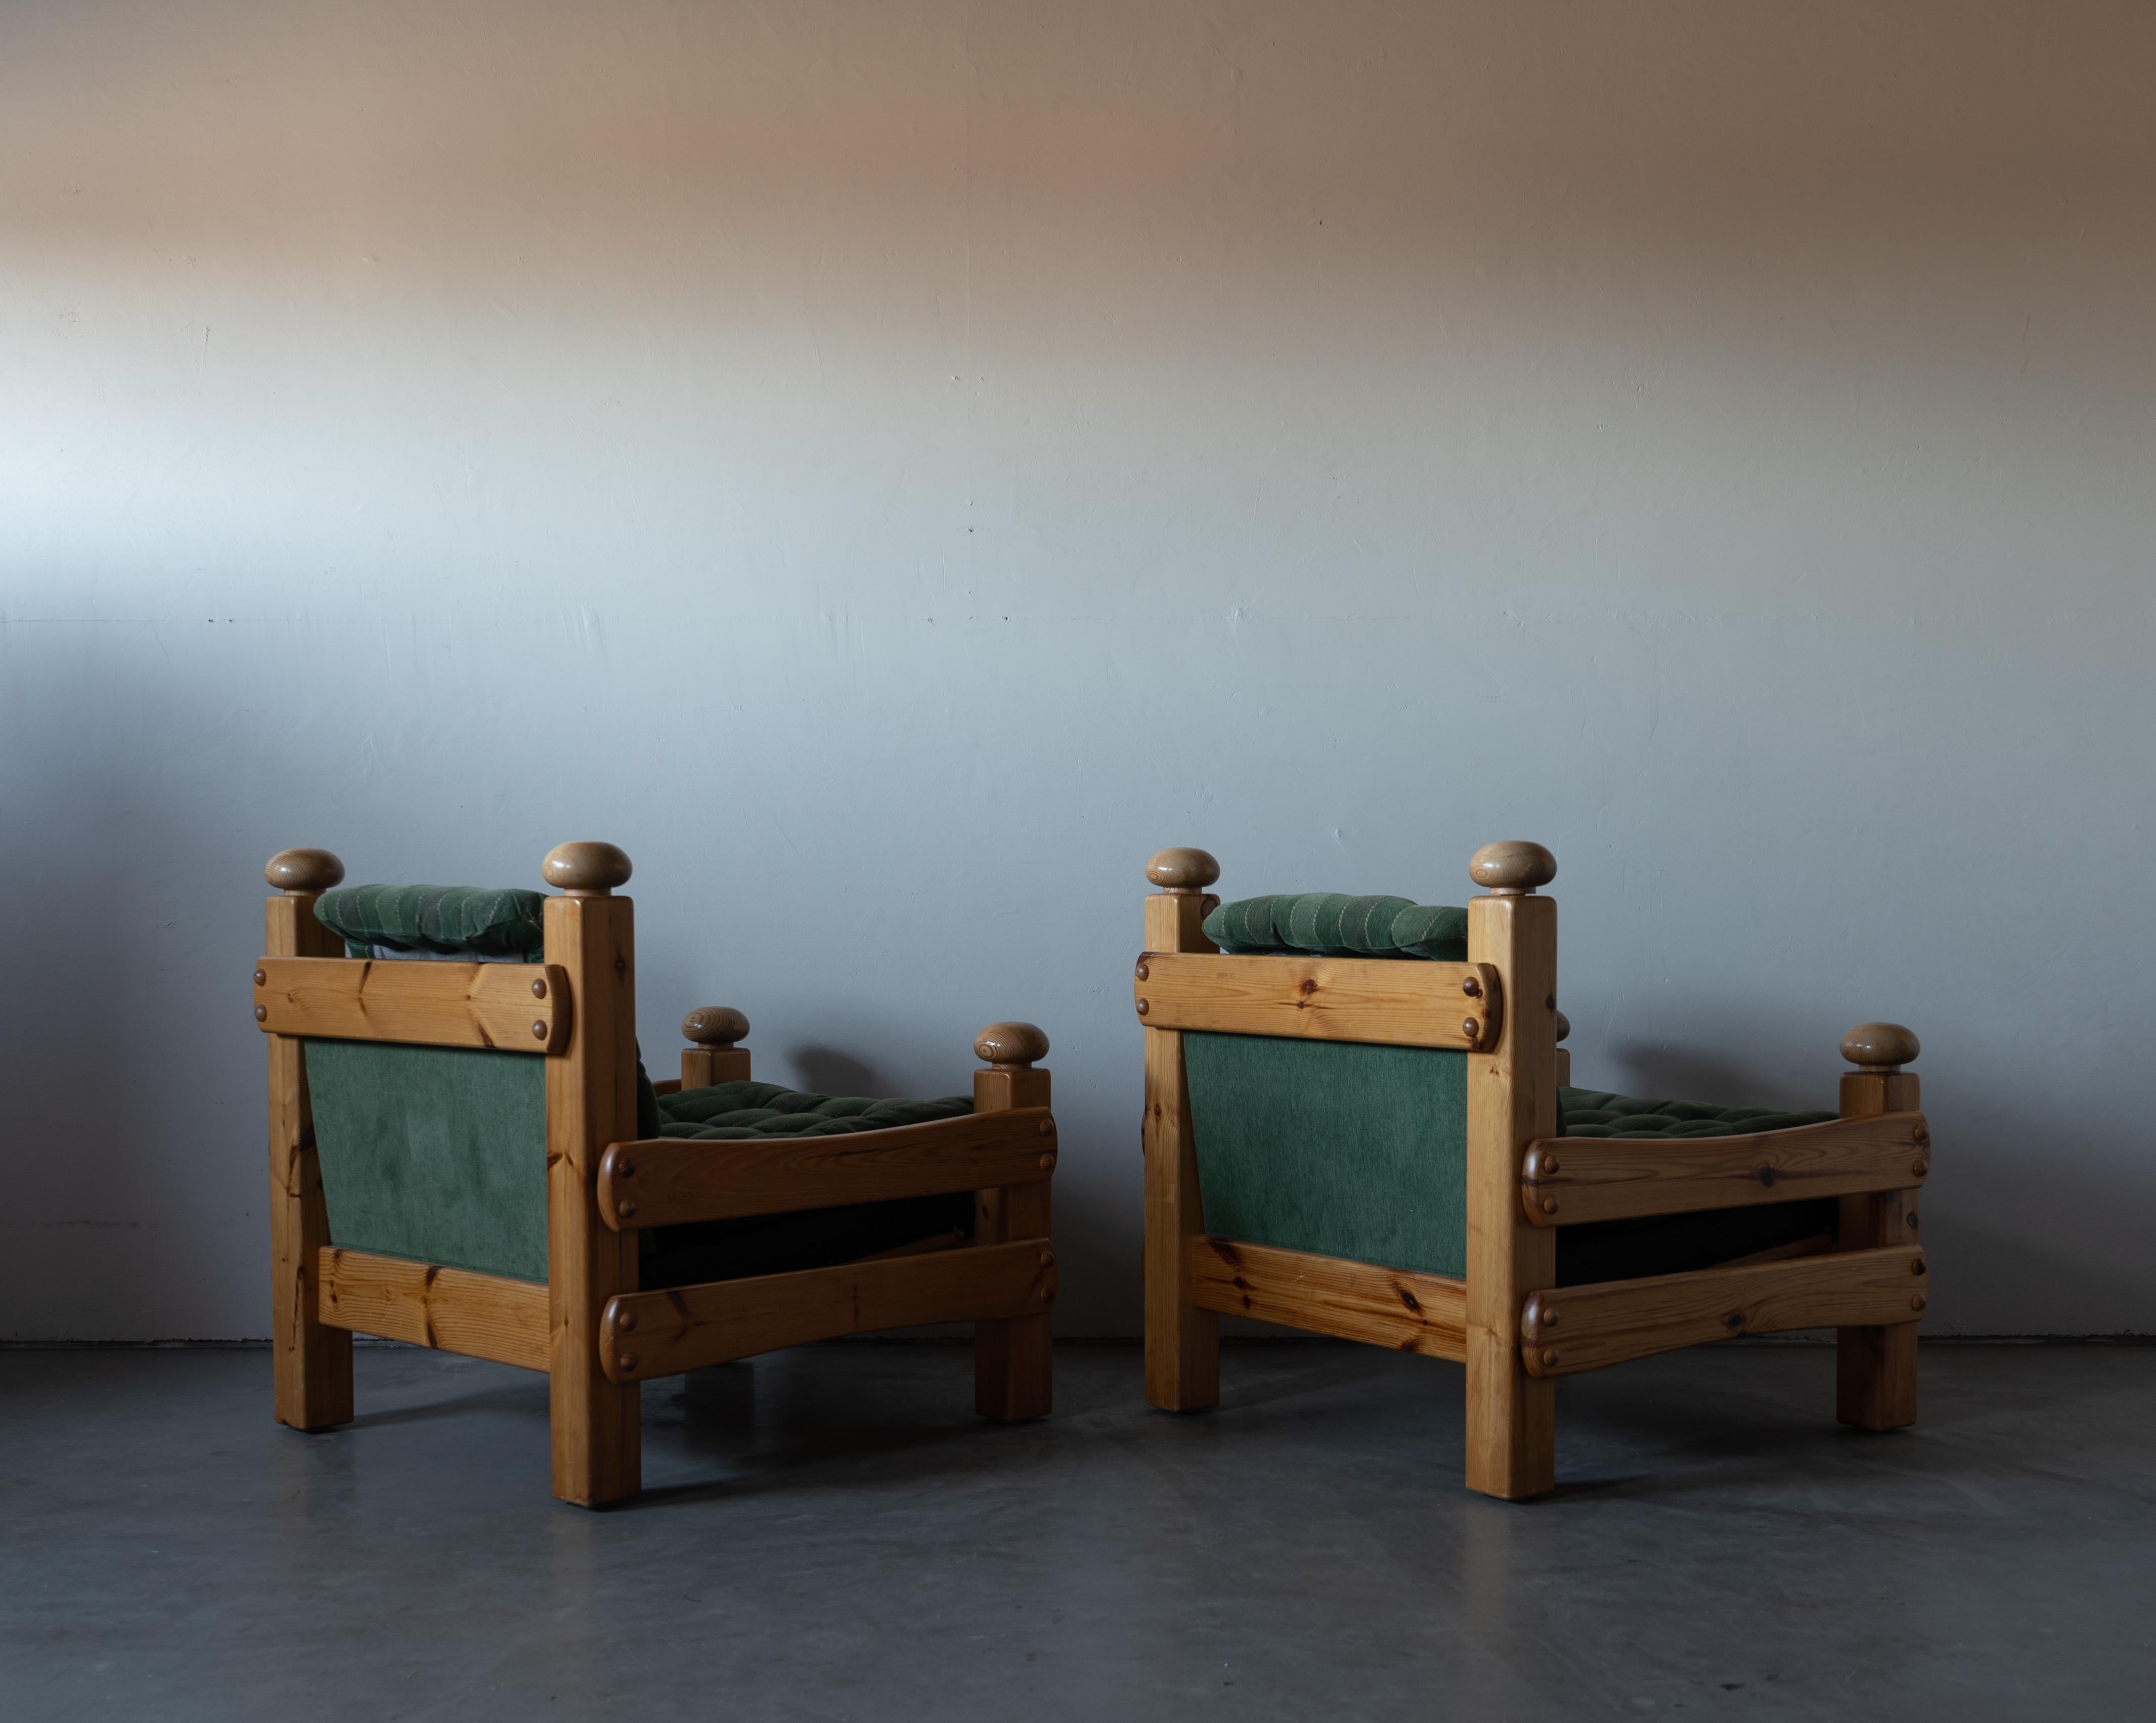 Swedish Designer, Lounge Chairs, Solid Pine, Green Fabric, Sweden, 1970s For Sale 5